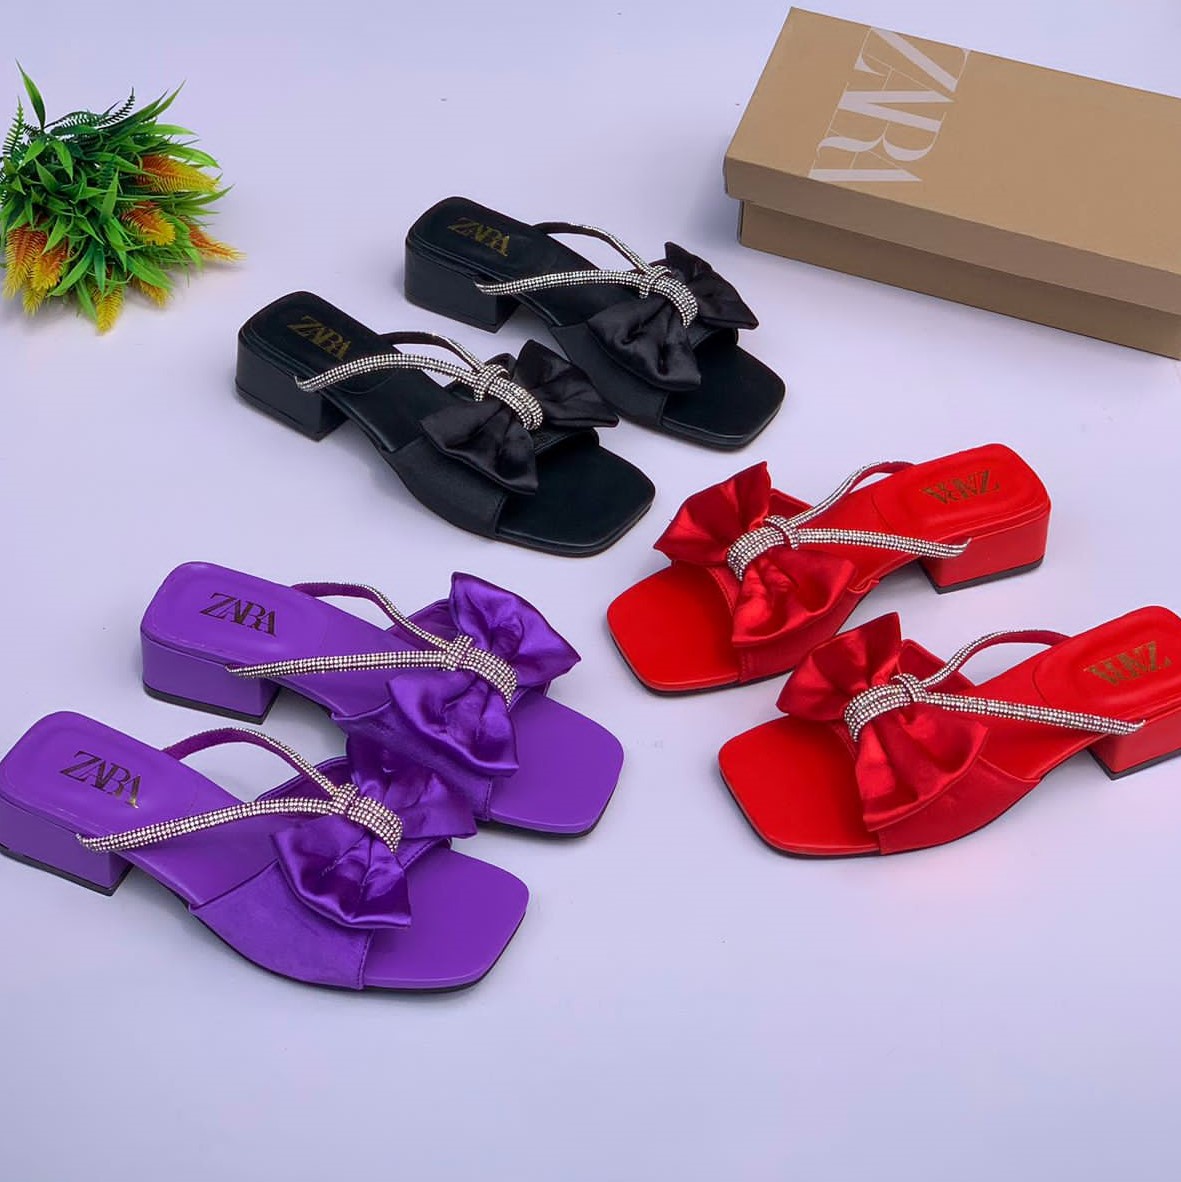 FULL LOVE LAVISHLY STONED COVERED SANDAL SHOES FOR WOMEN  CartRollers  ﻿Online Marketplace Shopping Store In Lagos Nigeria